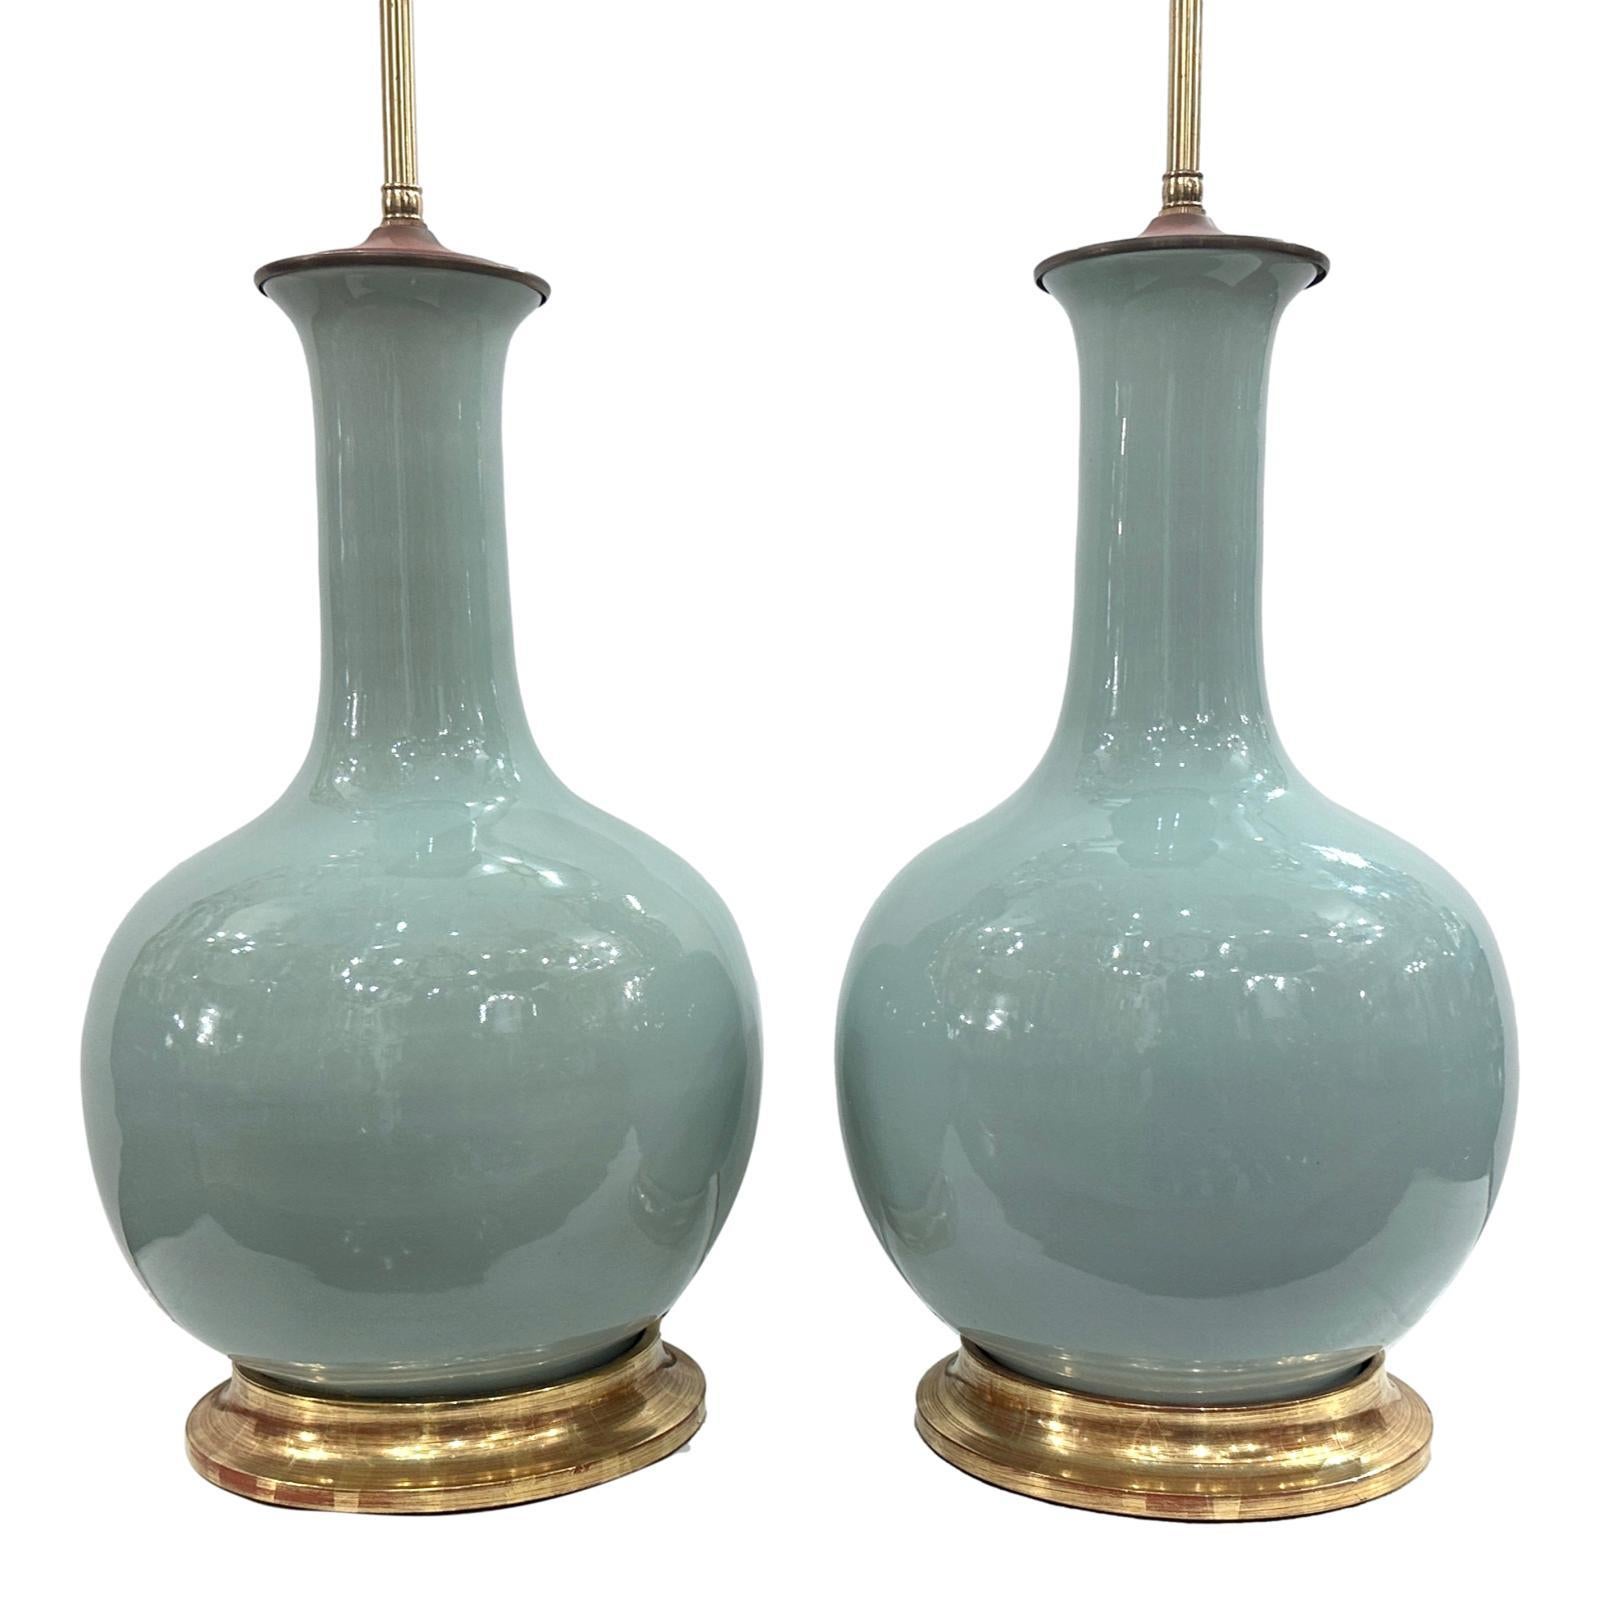 Pair of circa 1960's French celadon porcelain lamps with gilt bases.

Measurements:
Height of body: 19